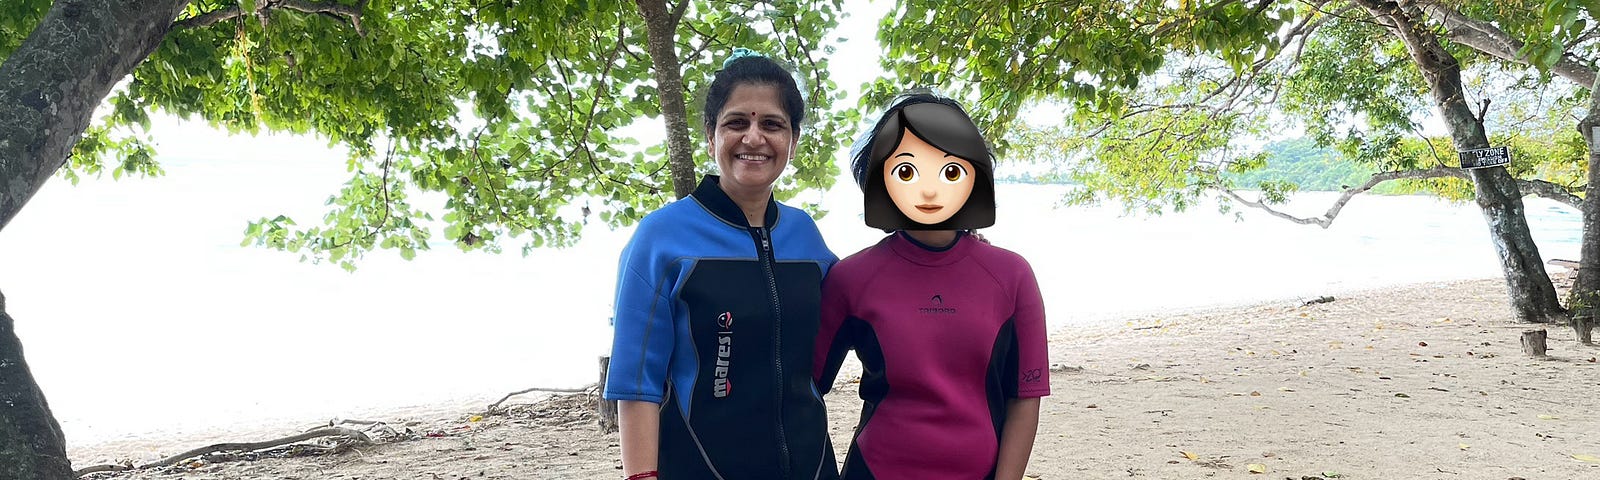 A woman and her daughter in scuba wear stand on the beach. There are green leaves on the trees on either side of them. This is a beach in a fertile place. The daughter is as tall as the mother.